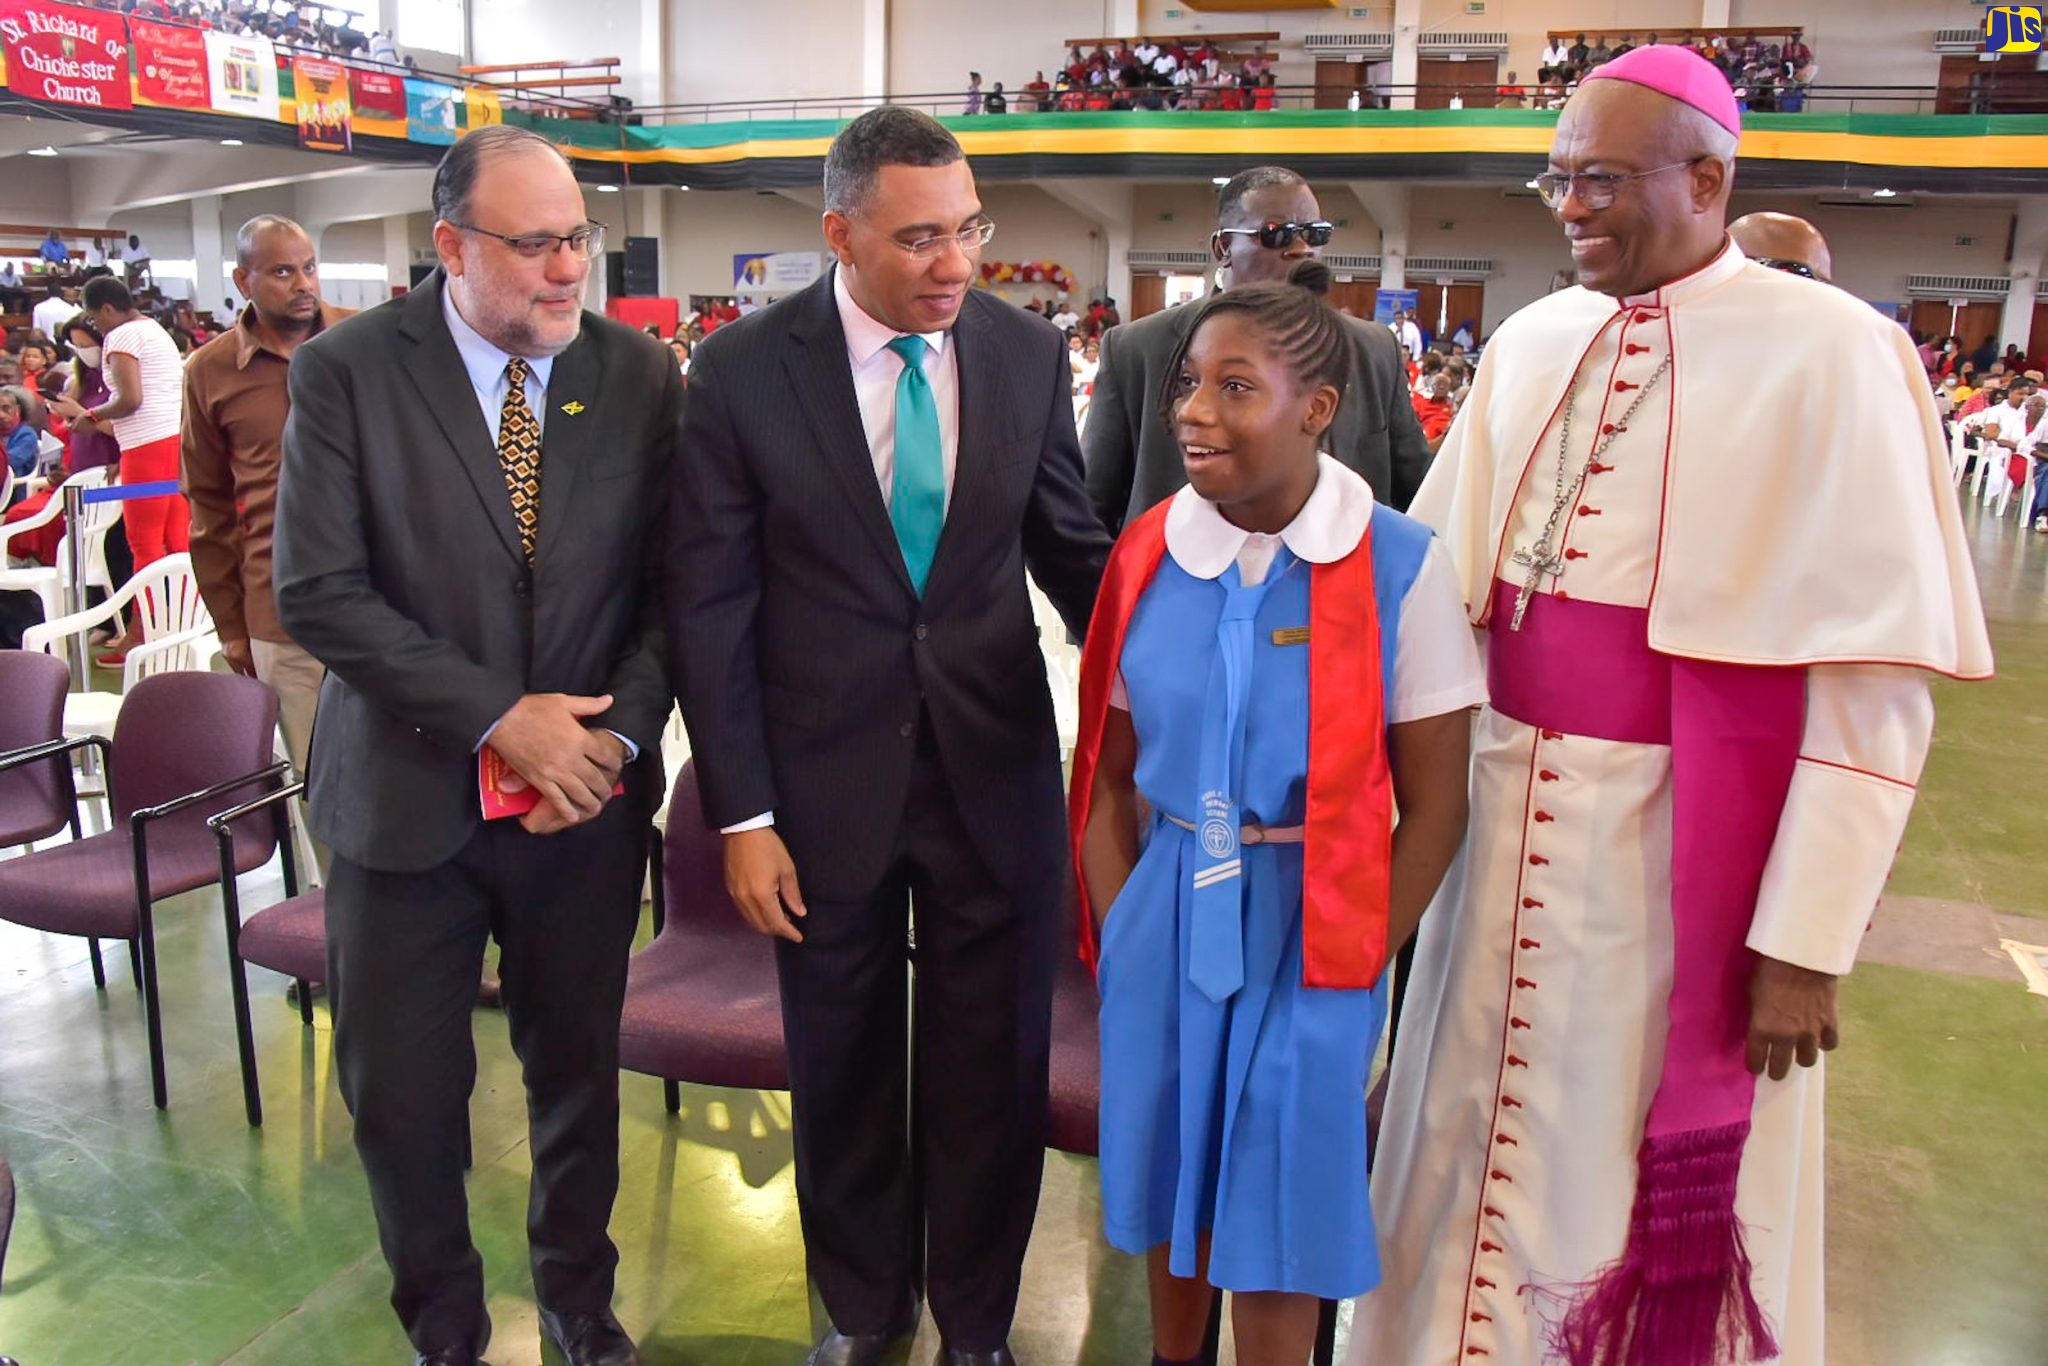 Gov’t Looking to Expand Partnership with the Church